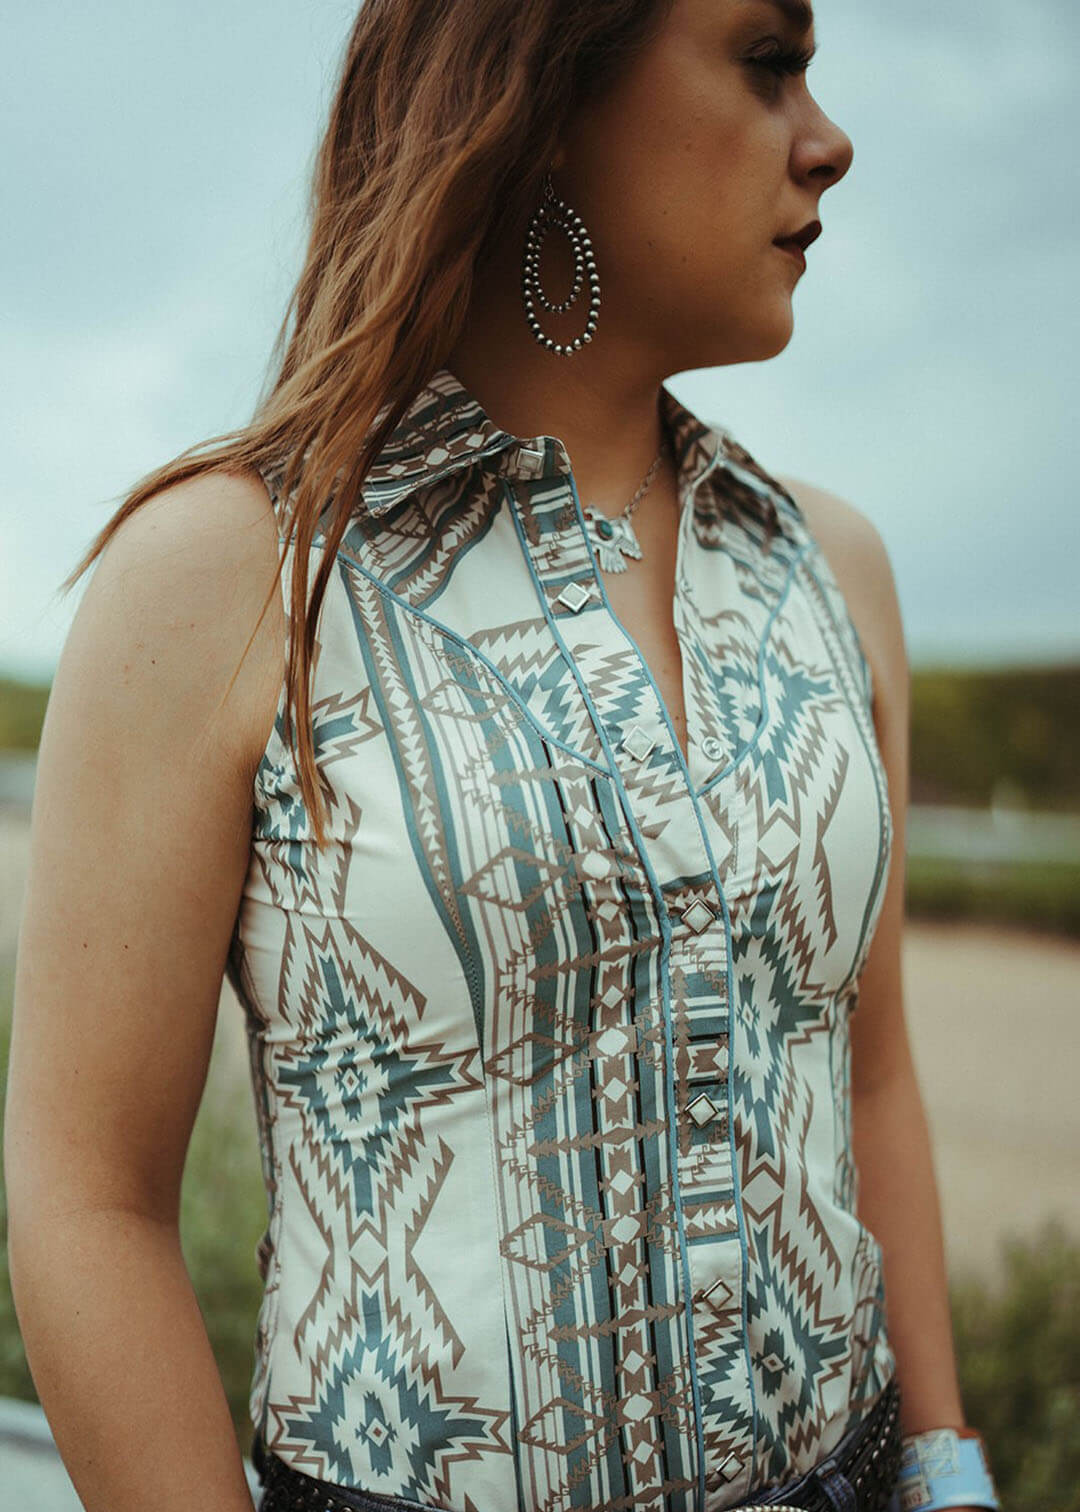 Close up image of the Aztec Sleeveless Snap shirt.  Has colors of teal, white, and tan.